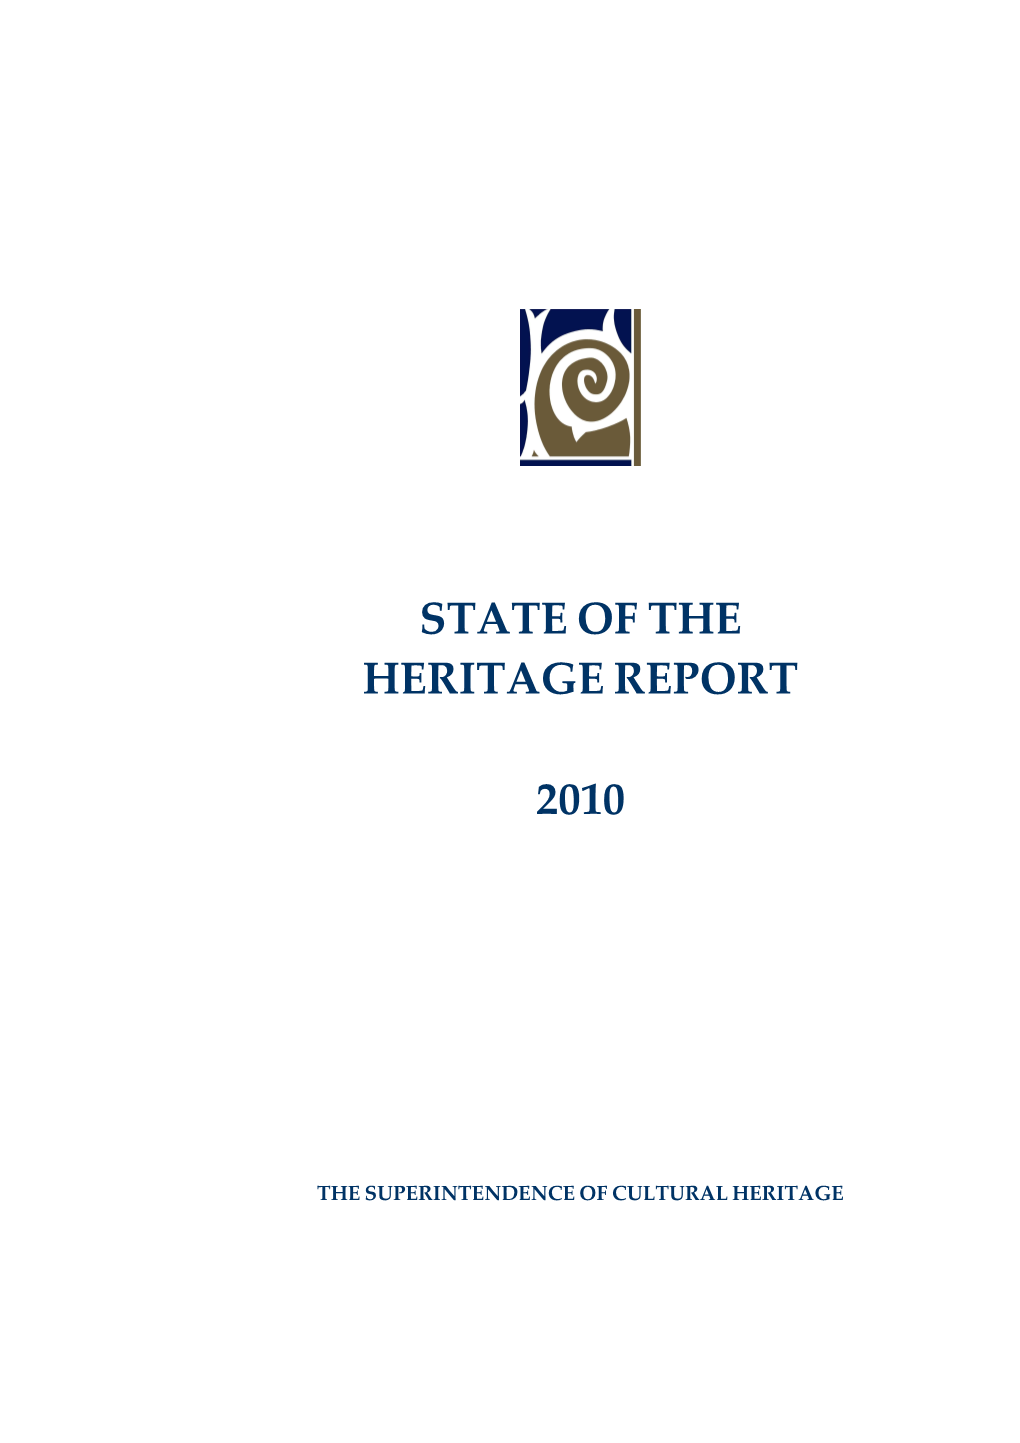 State of the Heritage Report 2010